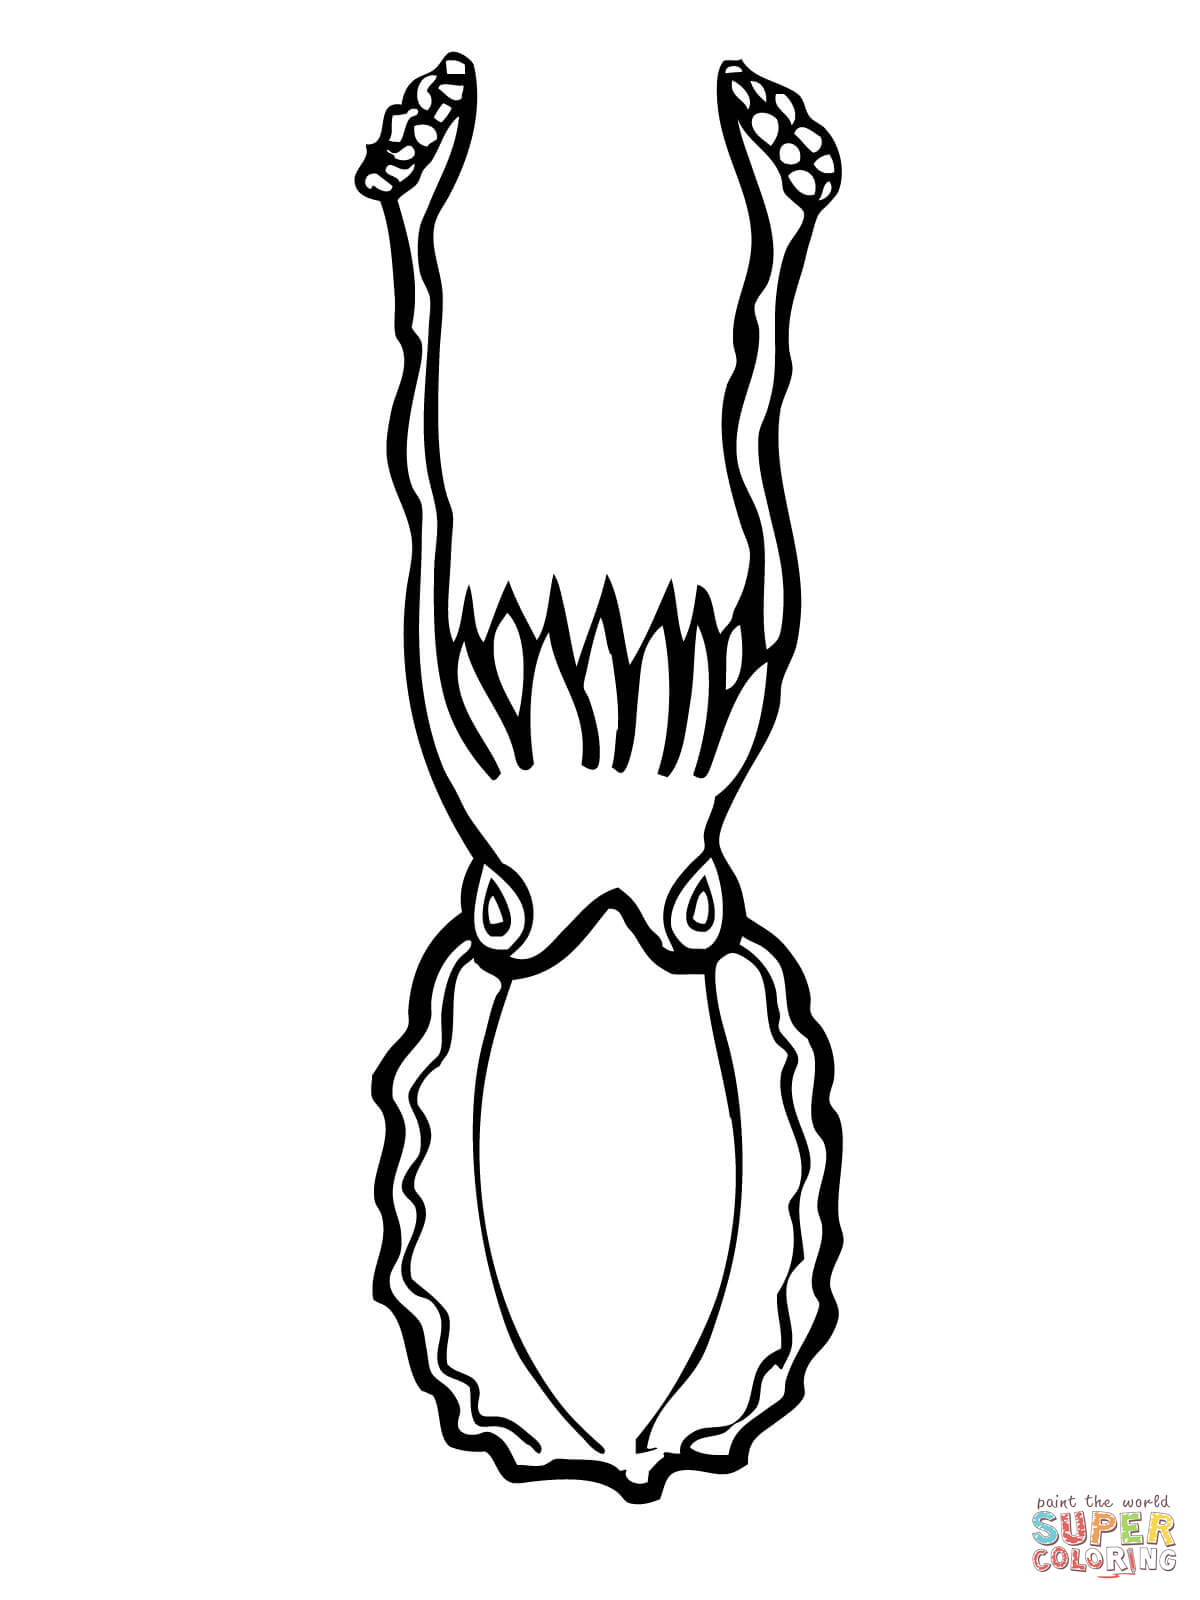 Cuttlefish coloring pages | Free Coloring Pages